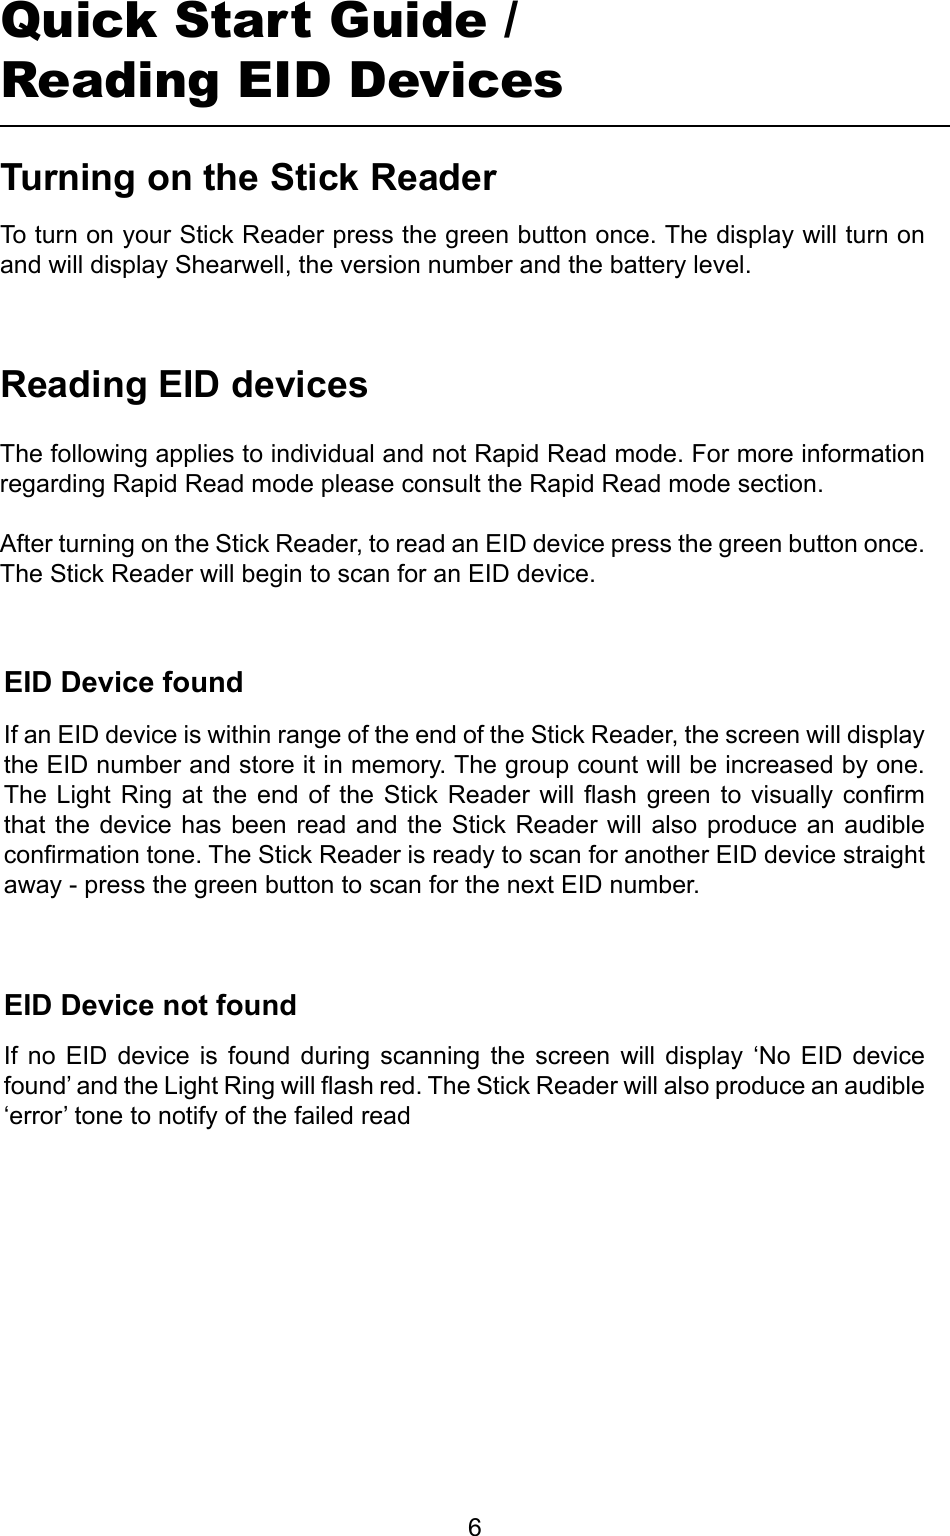         6TurningontheStickReaderQuick Start Guide /Reading EID DevicesTo turn on your Stick Reader press the green button once. The display will turn on and will display Shearwell, the version number and the battery level.ReadingEIDdevicesEIDDevicefoundEIDDevicenotfoundIf  no  EID  device  is  found  during  scanning  the  screen  will  display  ‘No  EID  device found’ and the Light Ring will ash red. The Stick Reader will also produce an audible ‘error’ tone to notify of the failed readIf an EID device is within range of the end of the Stick Reader, the screen will display the EID number and store it in memory. The group count will be increased by one. The Light  Ring at  the end  of  the Stick  Reader will  ash green  to  visually conrm that the device has  been  read and the Stick Reader  will  also produce an audible conrmation tone. The Stick Reader is ready to scan for another EID device straight away - press the green button to scan for the next EID number.The following applies to individual and not Rapid Read mode. For more information regarding Rapid Read mode please consult the Rapid Read mode section.After turning on the Stick Reader, to read an EID device press the green button once. The Stick Reader will begin to scan for an EID device.